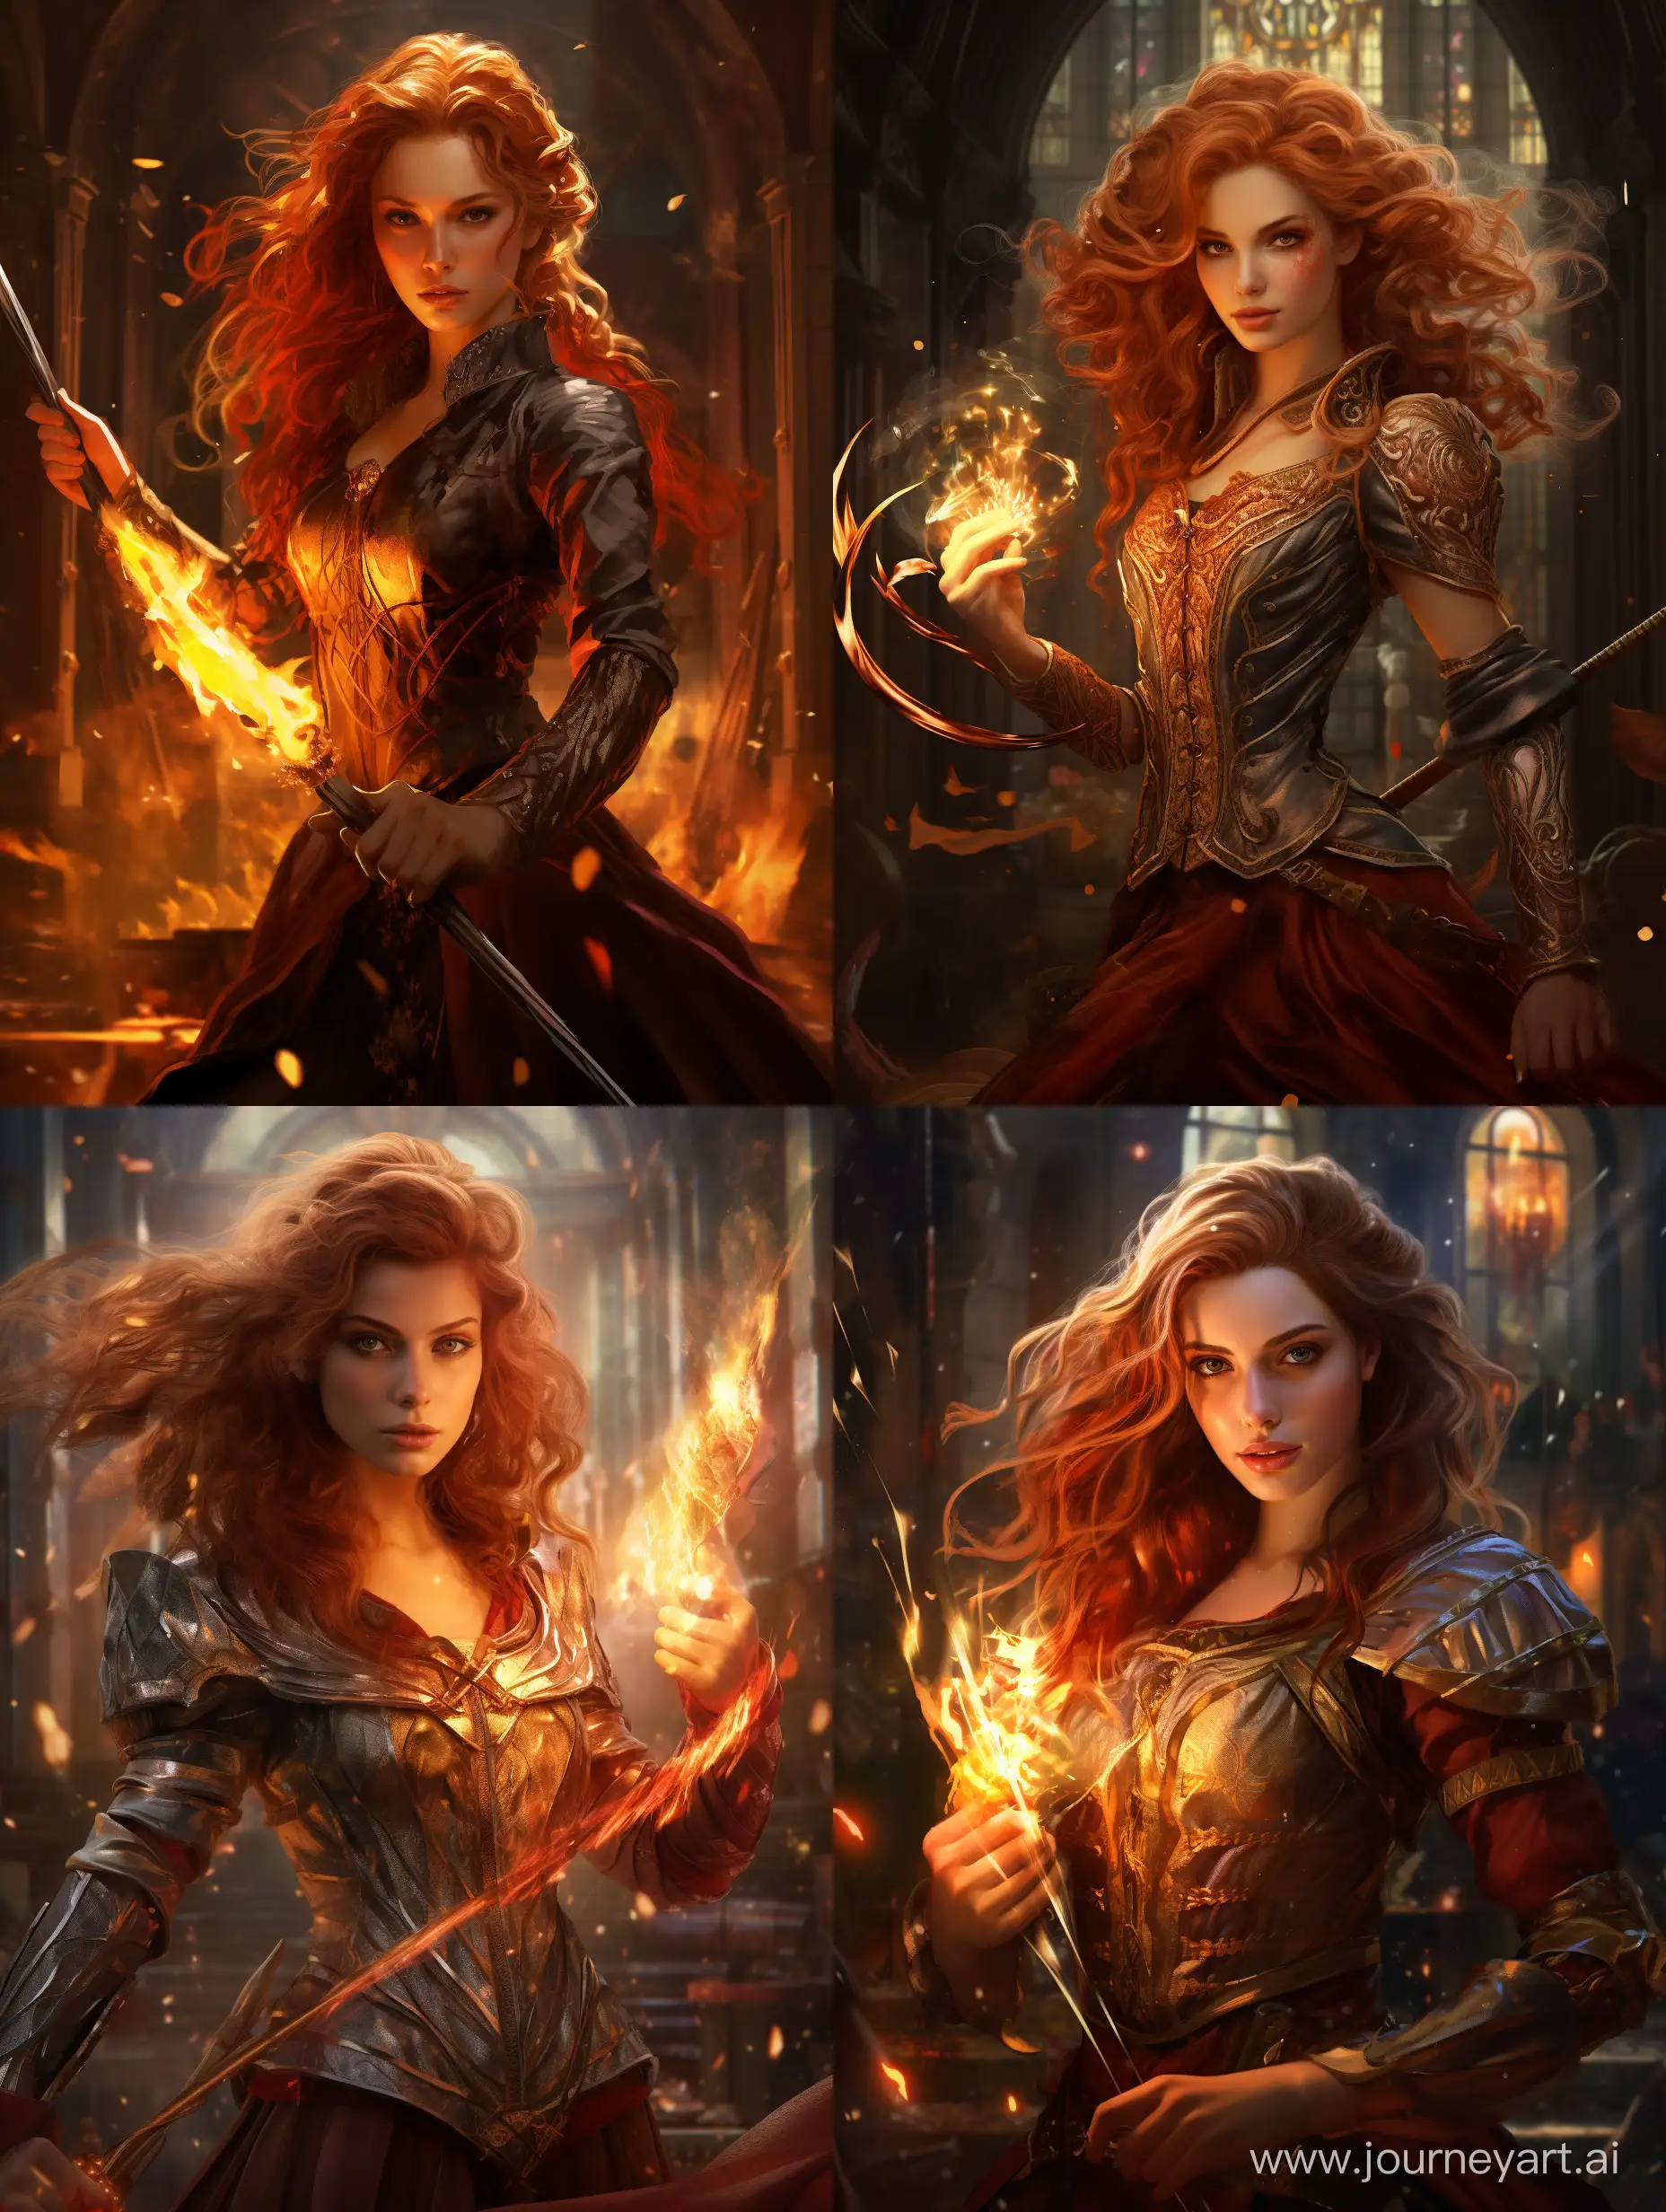 young red headed noble woman, wearing an elegant dress, wielding a rapier burning with magic fire 